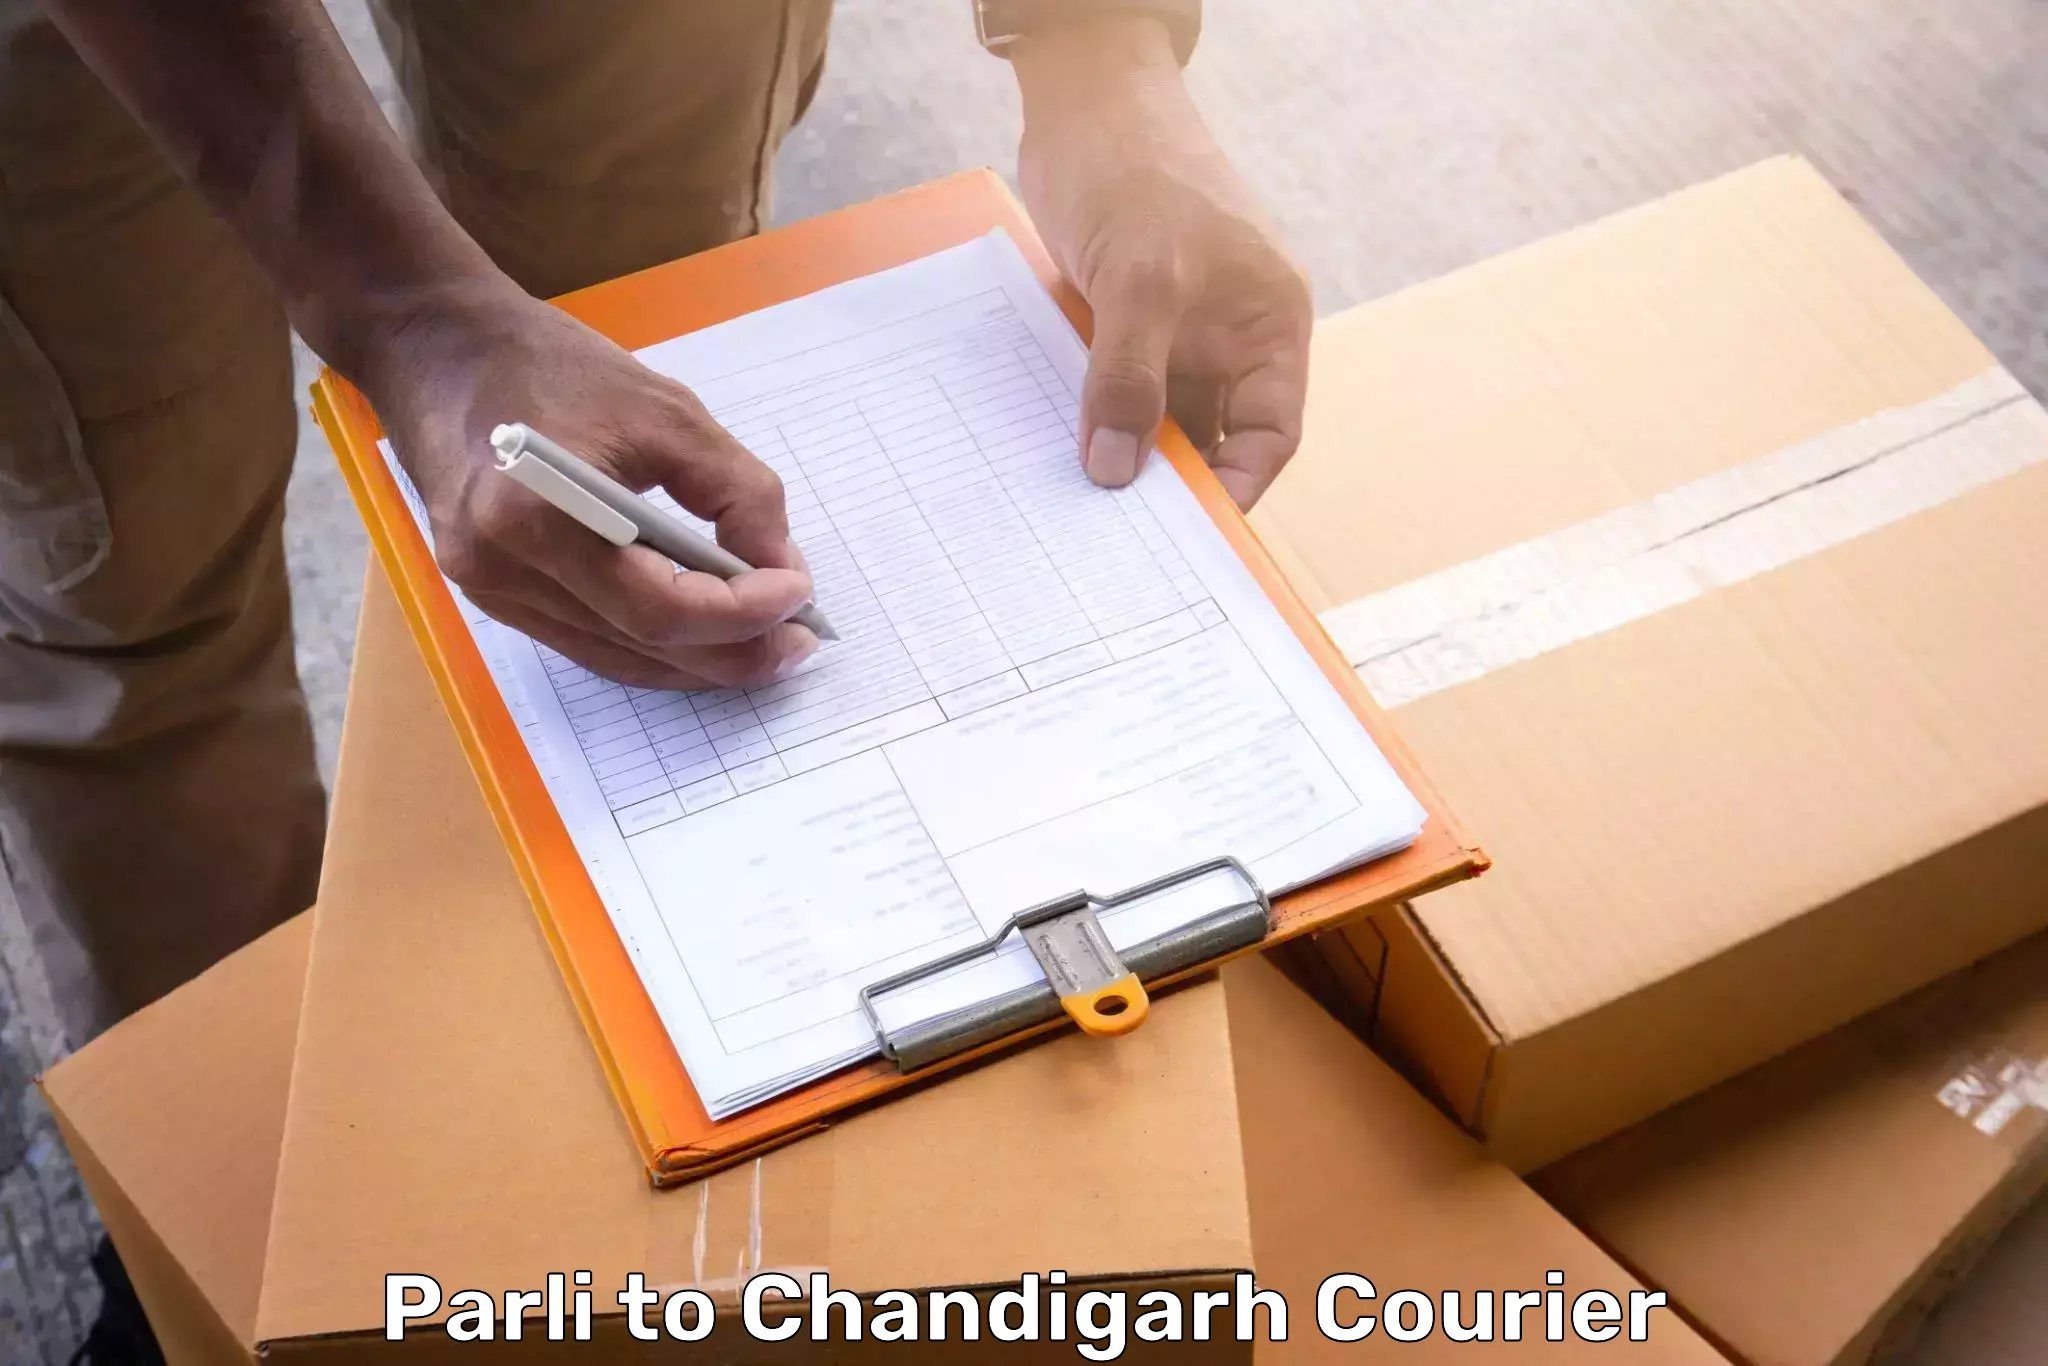 Luggage delivery network Parli to Chandigarh